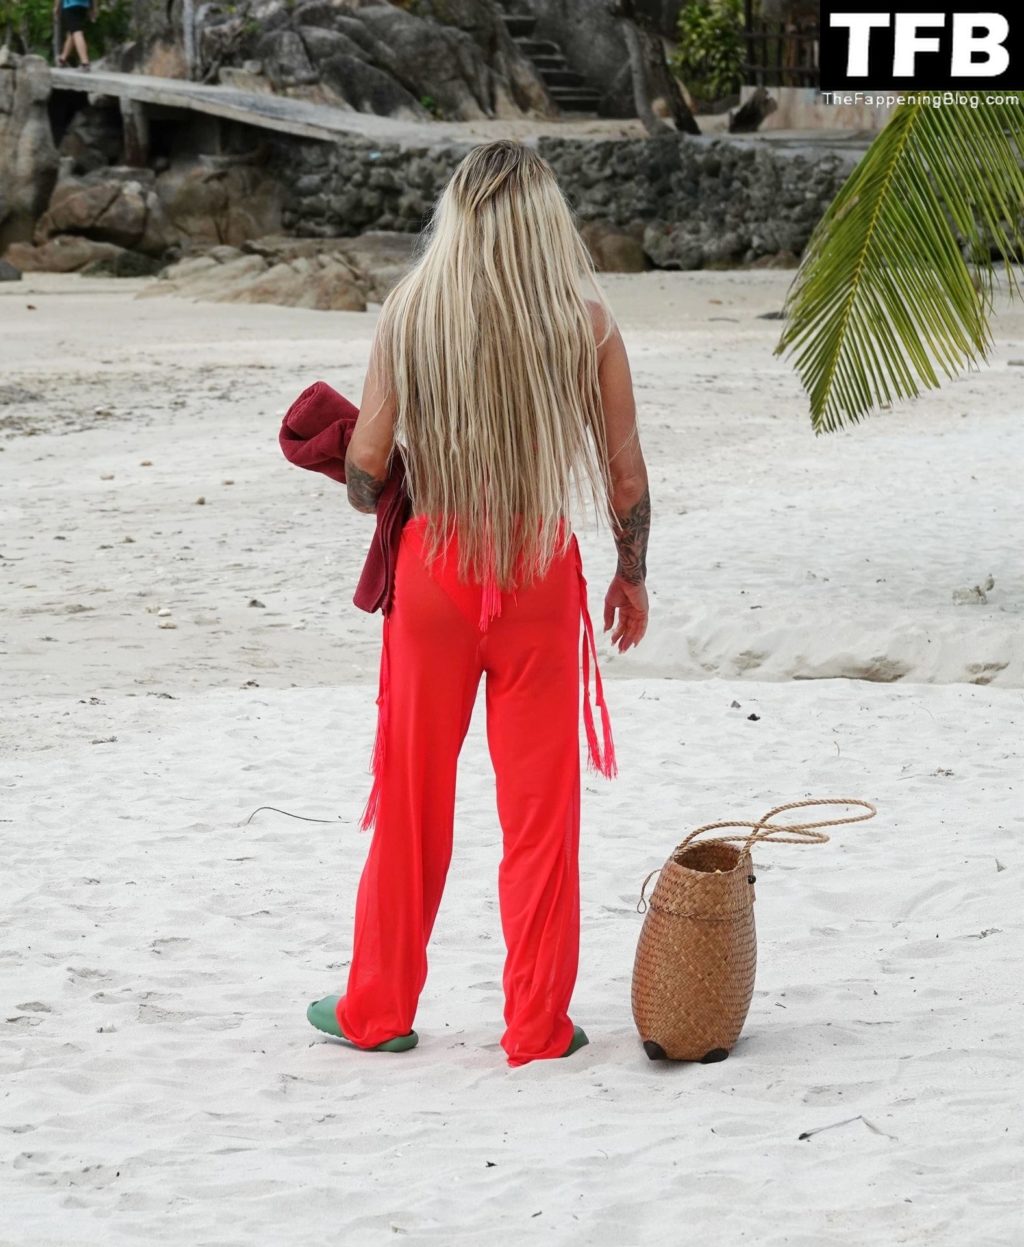 Katie Price Shows Off Her Bikini Body While Relaxing on the Beach in Thailand (57 Photos)